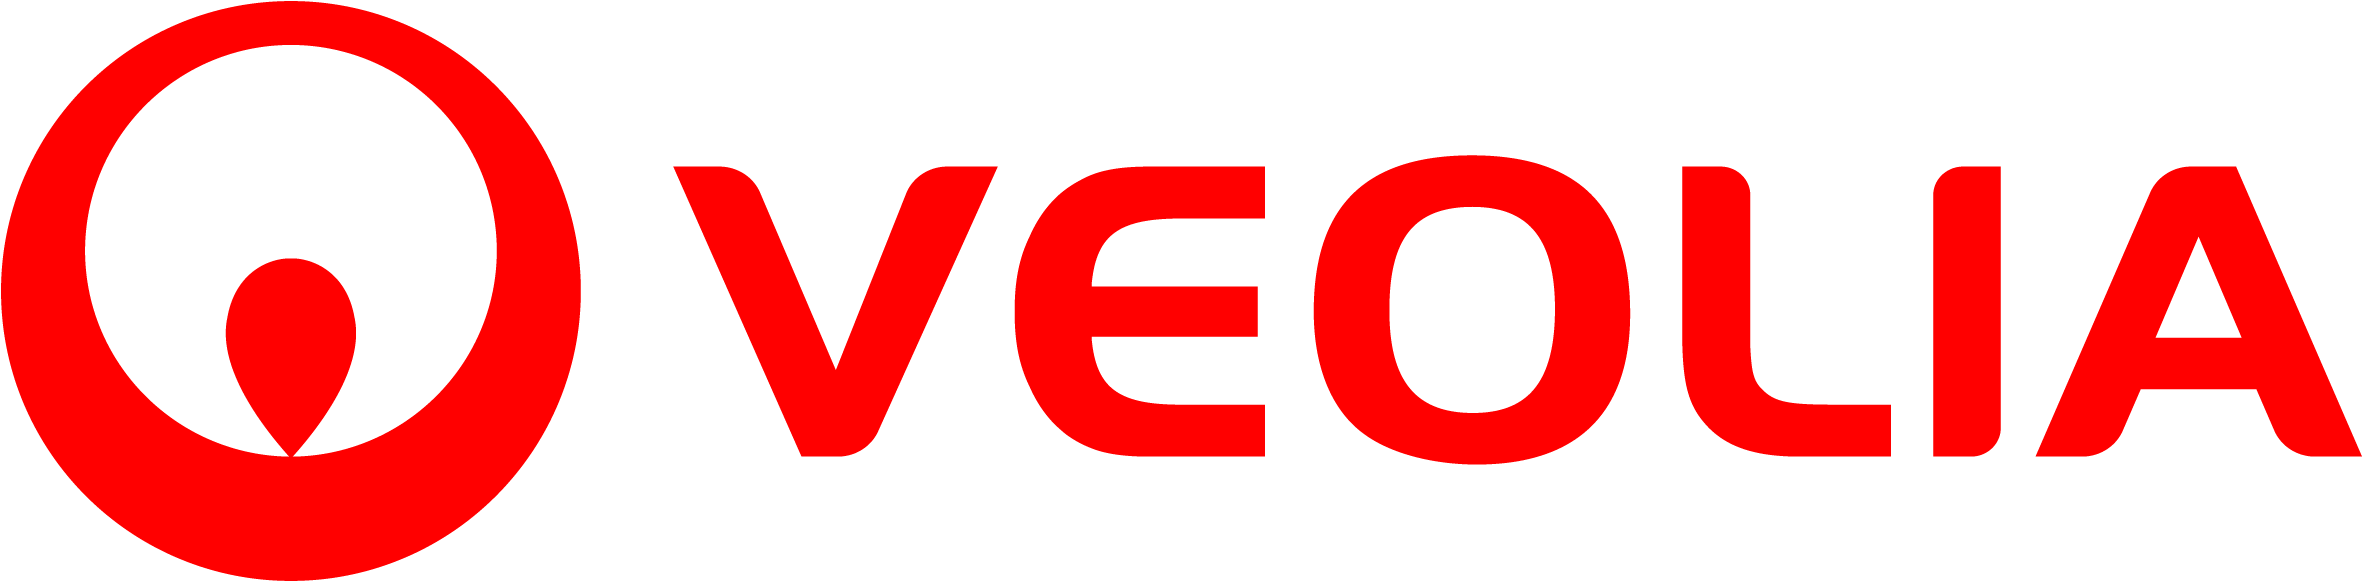 Sustainable St Albans Week 2018 Couldn't Operate Without - Veolia Water Technologies Logo (3009x1228)